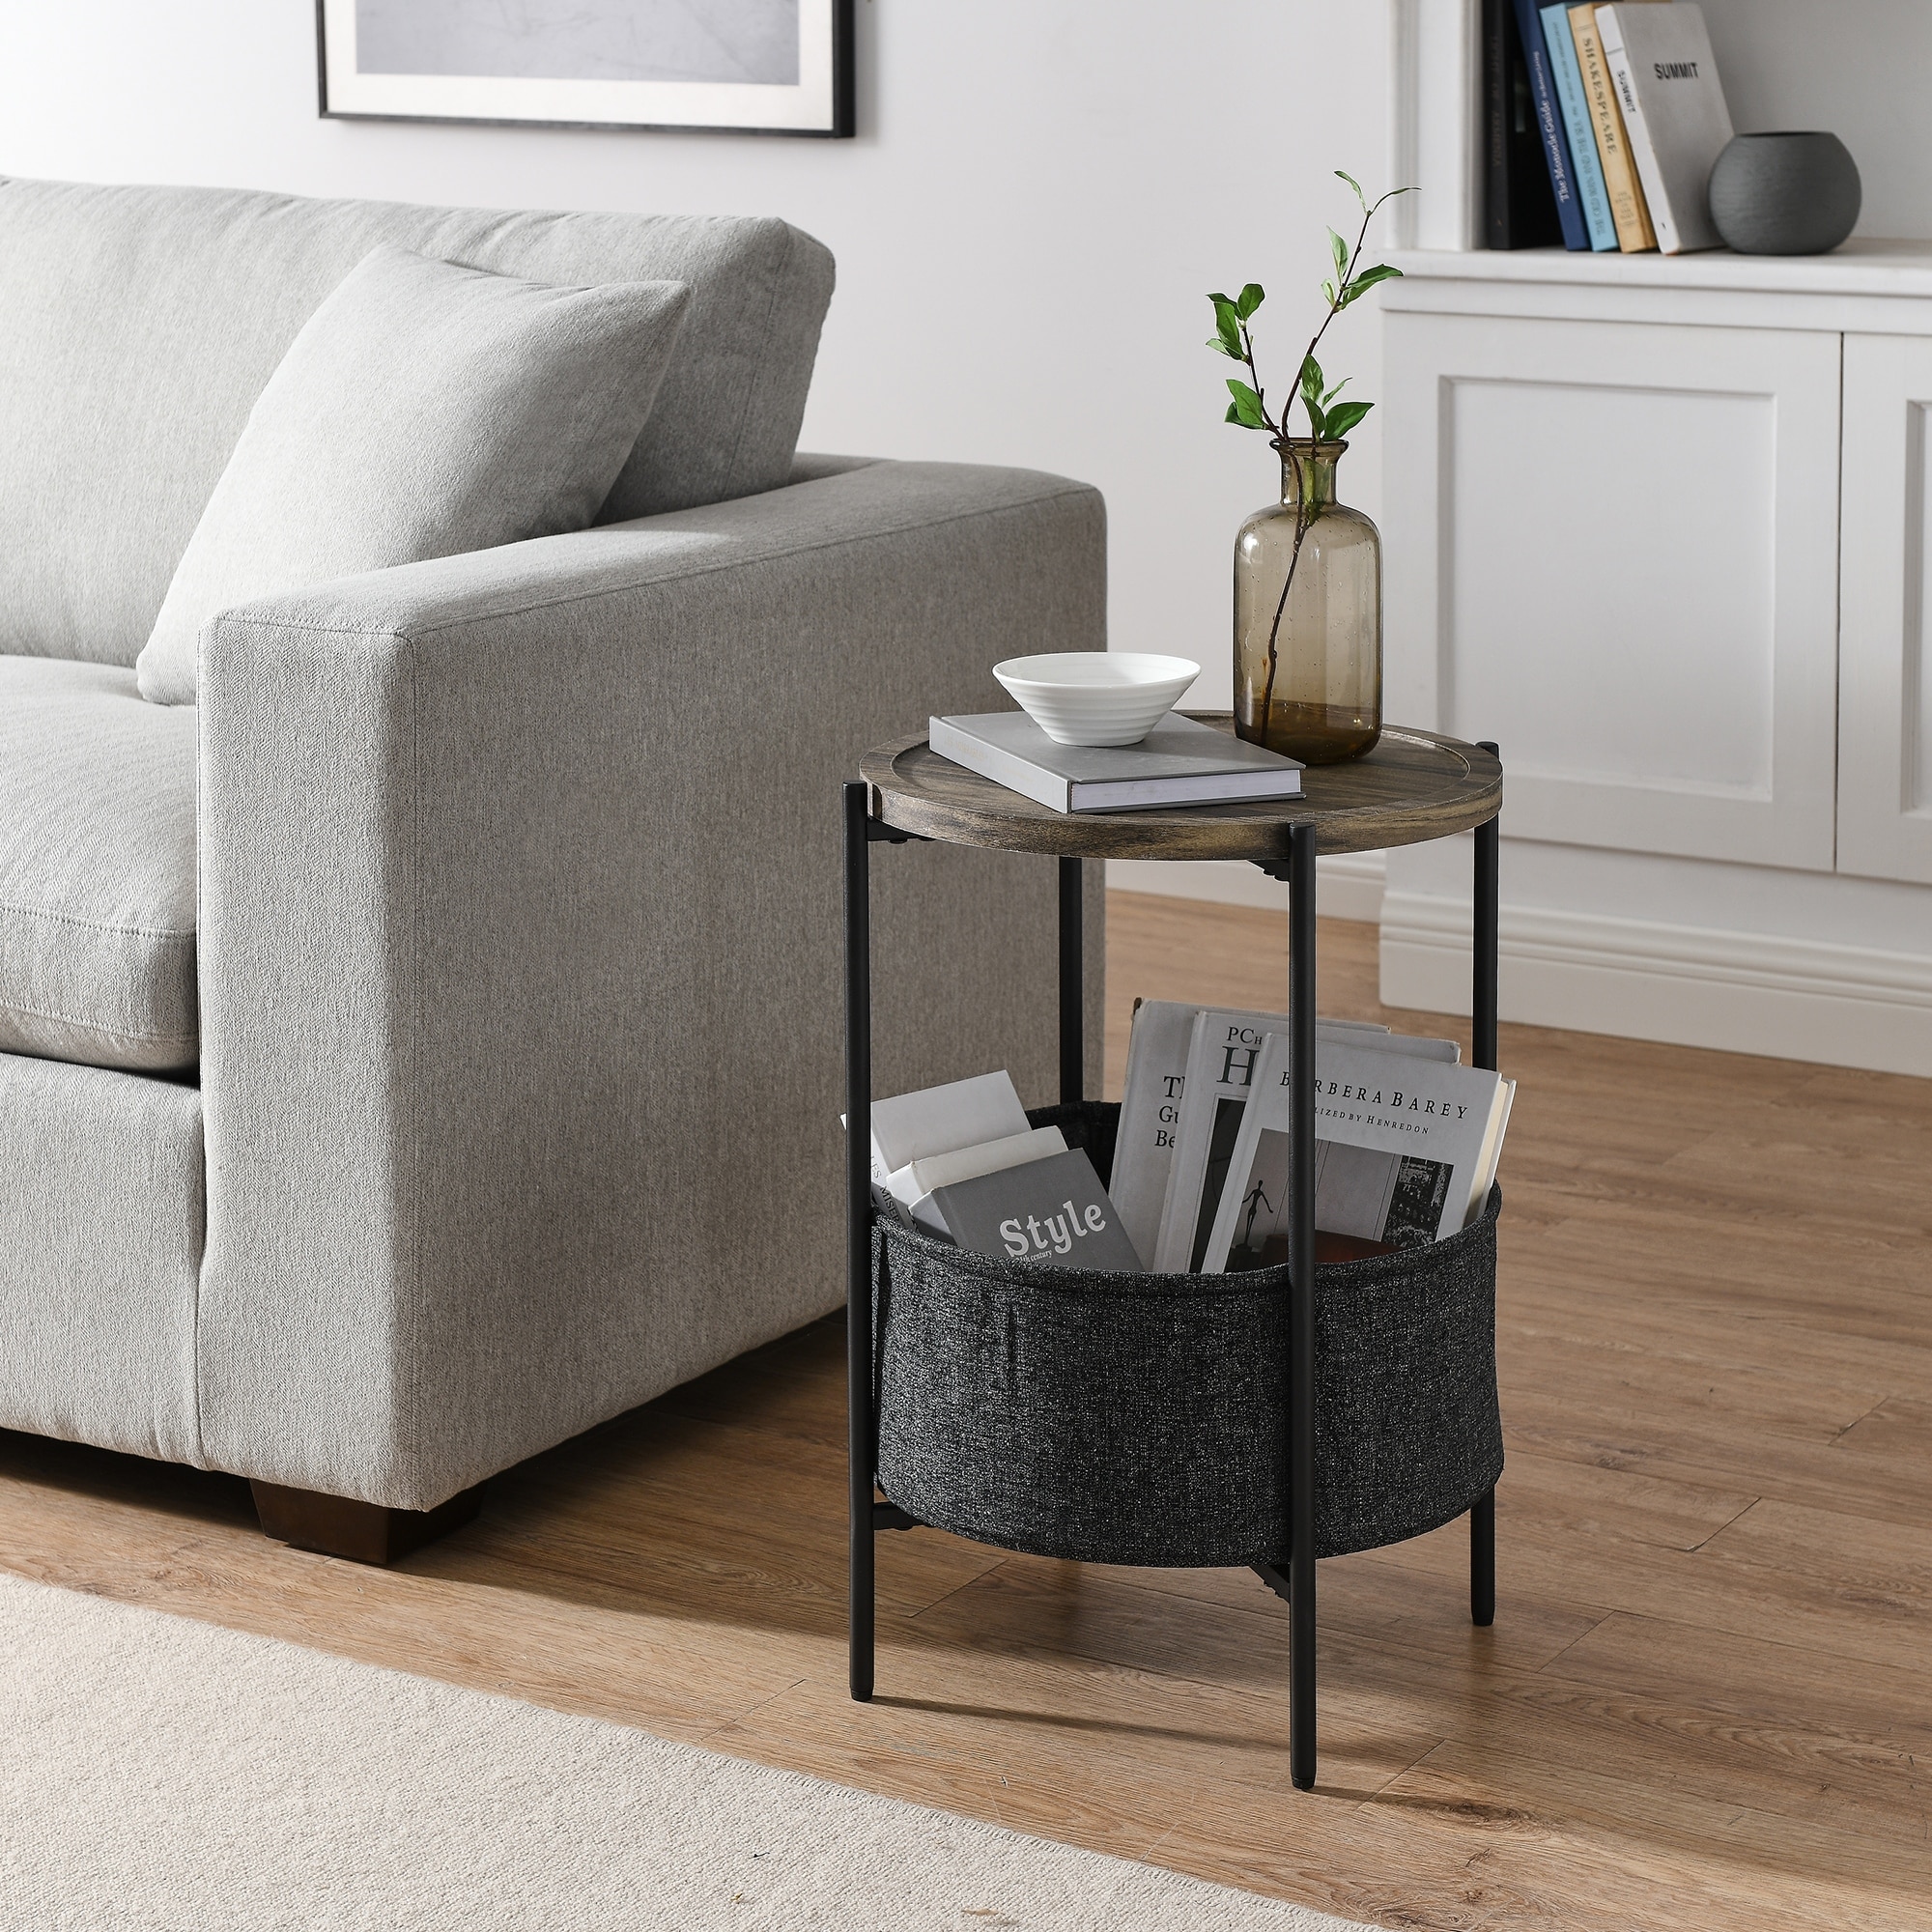 Modern Accent Table with Storage Basket, Cloth Bag and Brown - 35149025